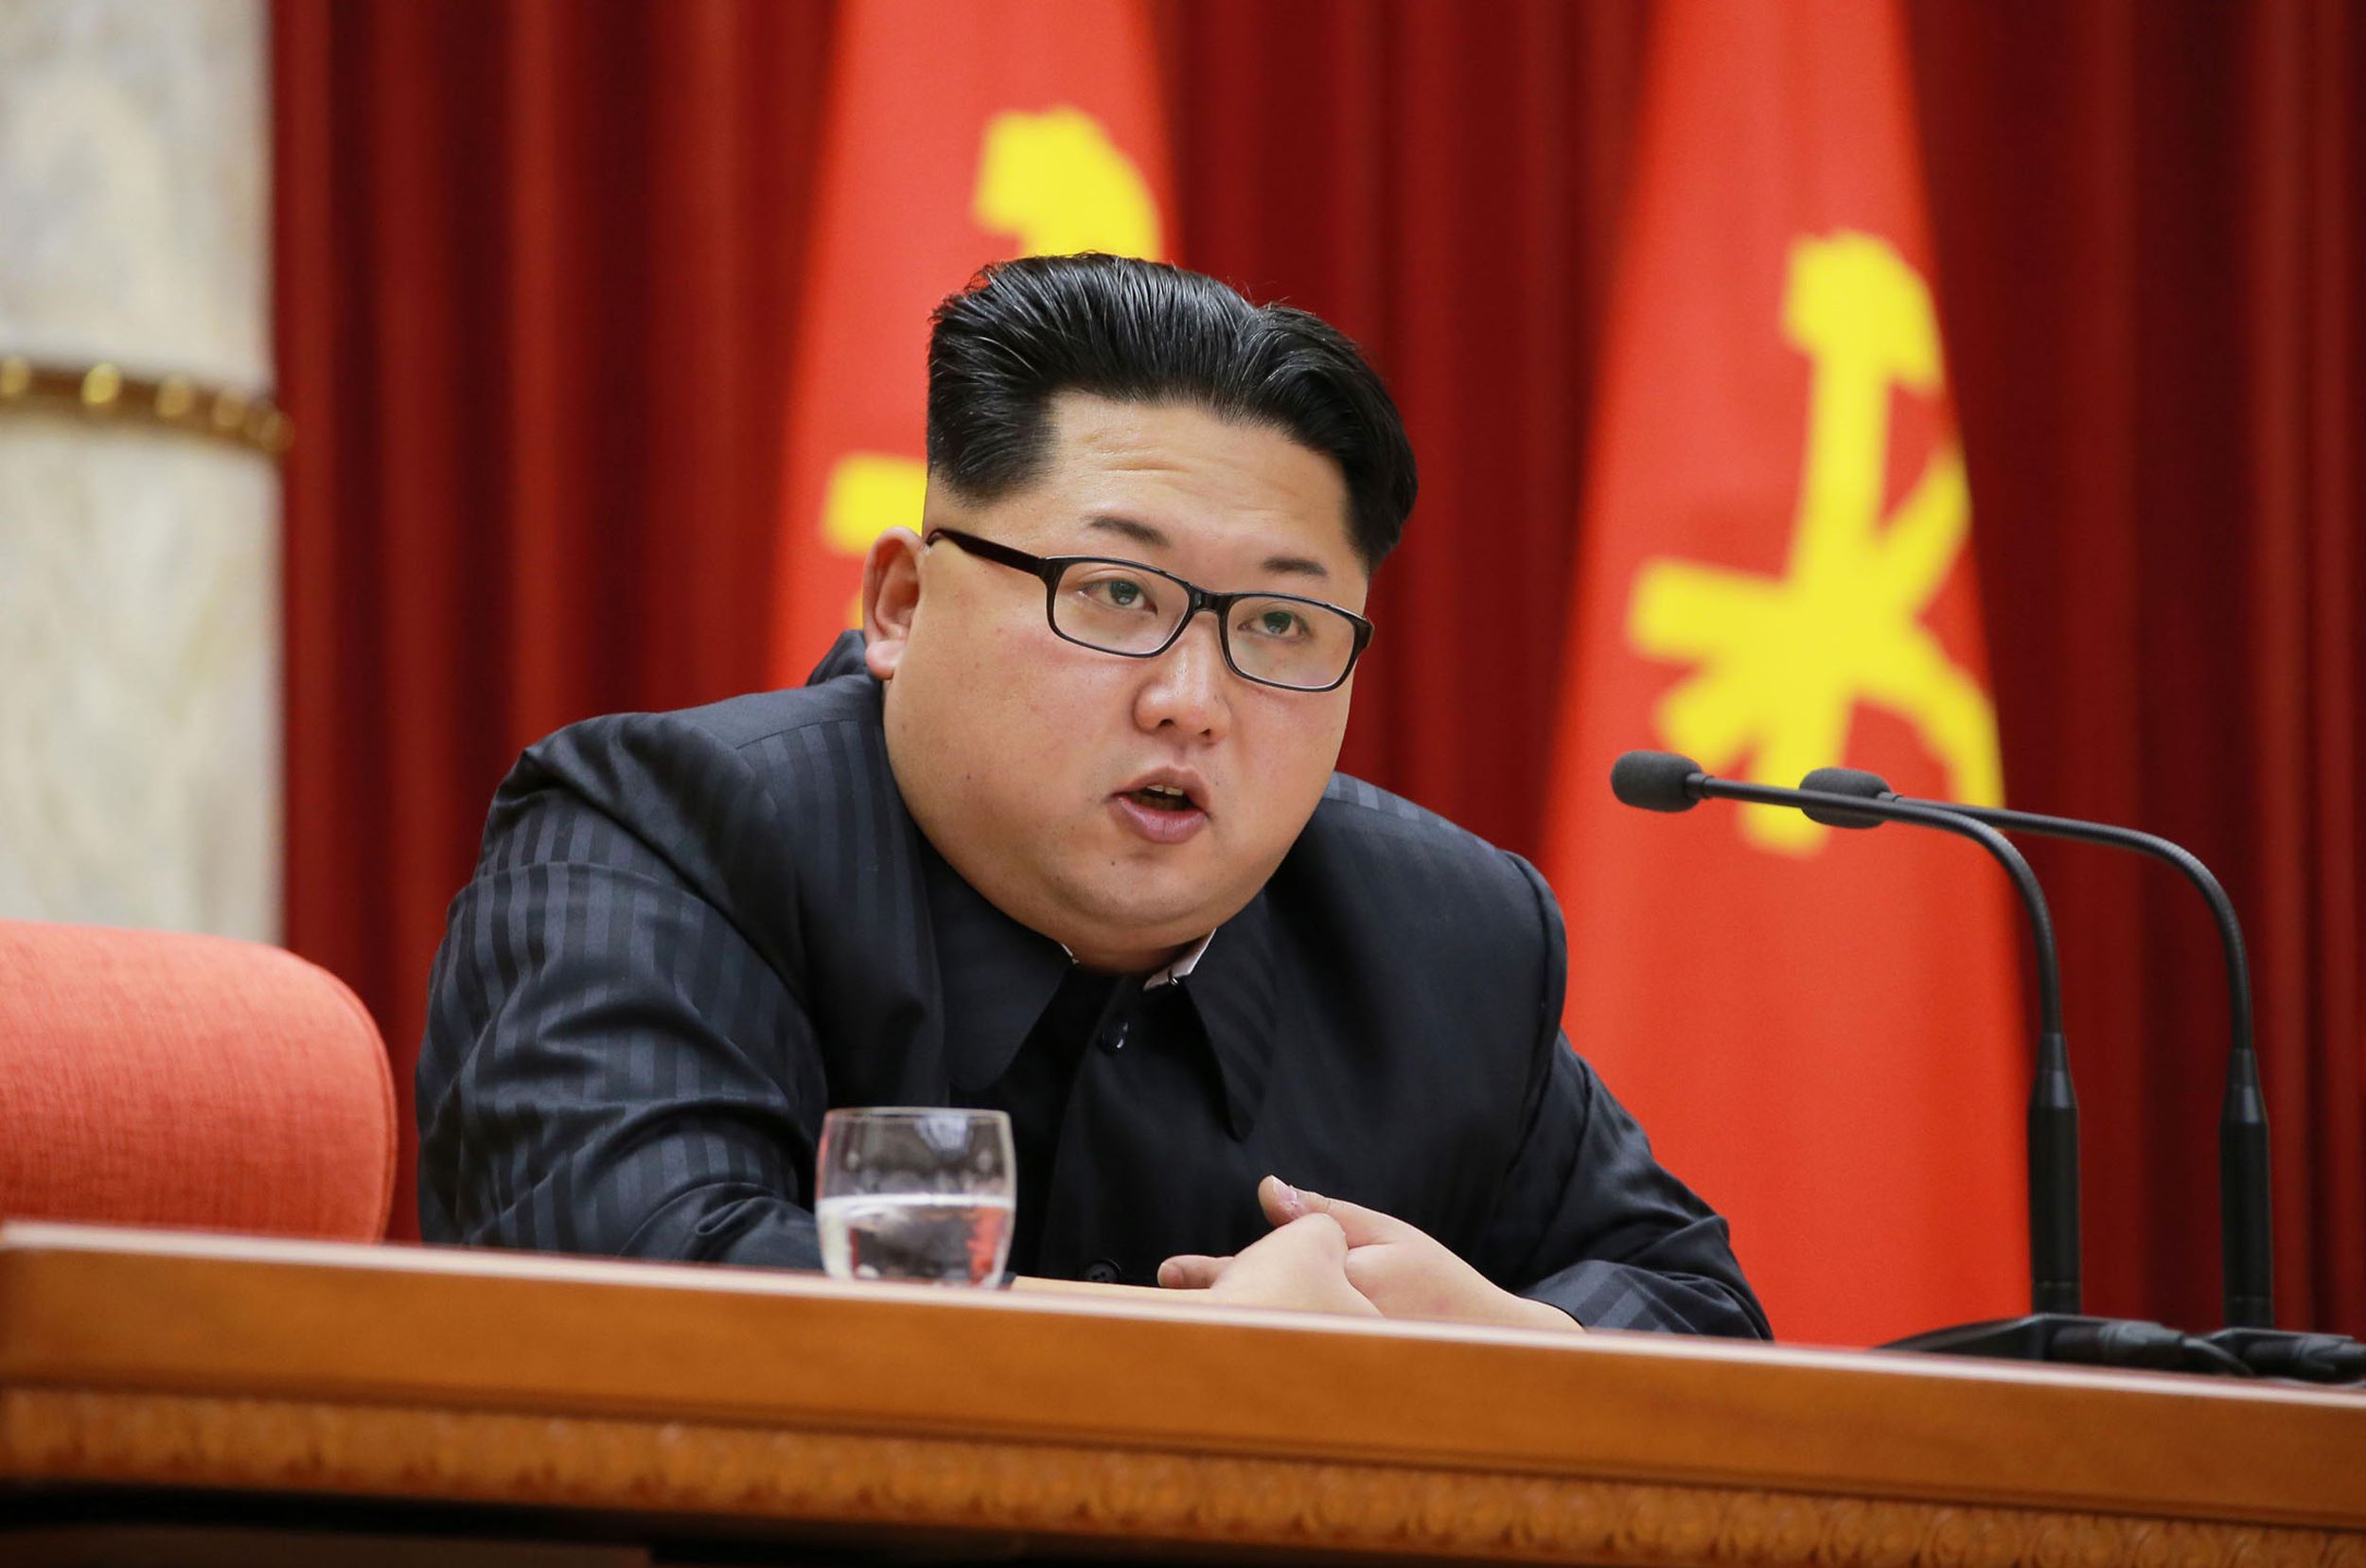 This picture released from North Korea's official Korean Central News Agency (KCNA) on January 13, 2016 shows North Korean leader Kim Jong-Un delivering a speech at a national awards ceremony for nuclear scientists who contributed to the country's latest nuclear test in Pyongyang on January 12, 2016. North Korea says last week's test was of a miniaturised hydrogen bomb -- a claim dismissed by experts who argue the yield was far too low for a full-fledged thermonuclear device. REPUBLIC OF KOREA OUT AFP PHOTO / KCNA via KNS THIS PICTURE WAS MADE AVAILABLE BY A THIRD PARTY. AFP CAN NOT INDEPENDENTLY VERIFY THE AUTHENTICITY, LOCATION, DATE AND CONTENT OF THIS IMAGE. THIS PHOTO IS DISTRIBUTED EXACTLY AS RECEIVED BY AFP. ---EDITORS NOTE--- RESTRICTED TO EDITORIAL USE - MANDATORY CREDIT "AFP PHOTO/KCNA VIA KNS" - NO MARKETING NO ADVERTISING CAMPAIGNS - DISTRIBUTED AS A SERVICE TO CLIENTS